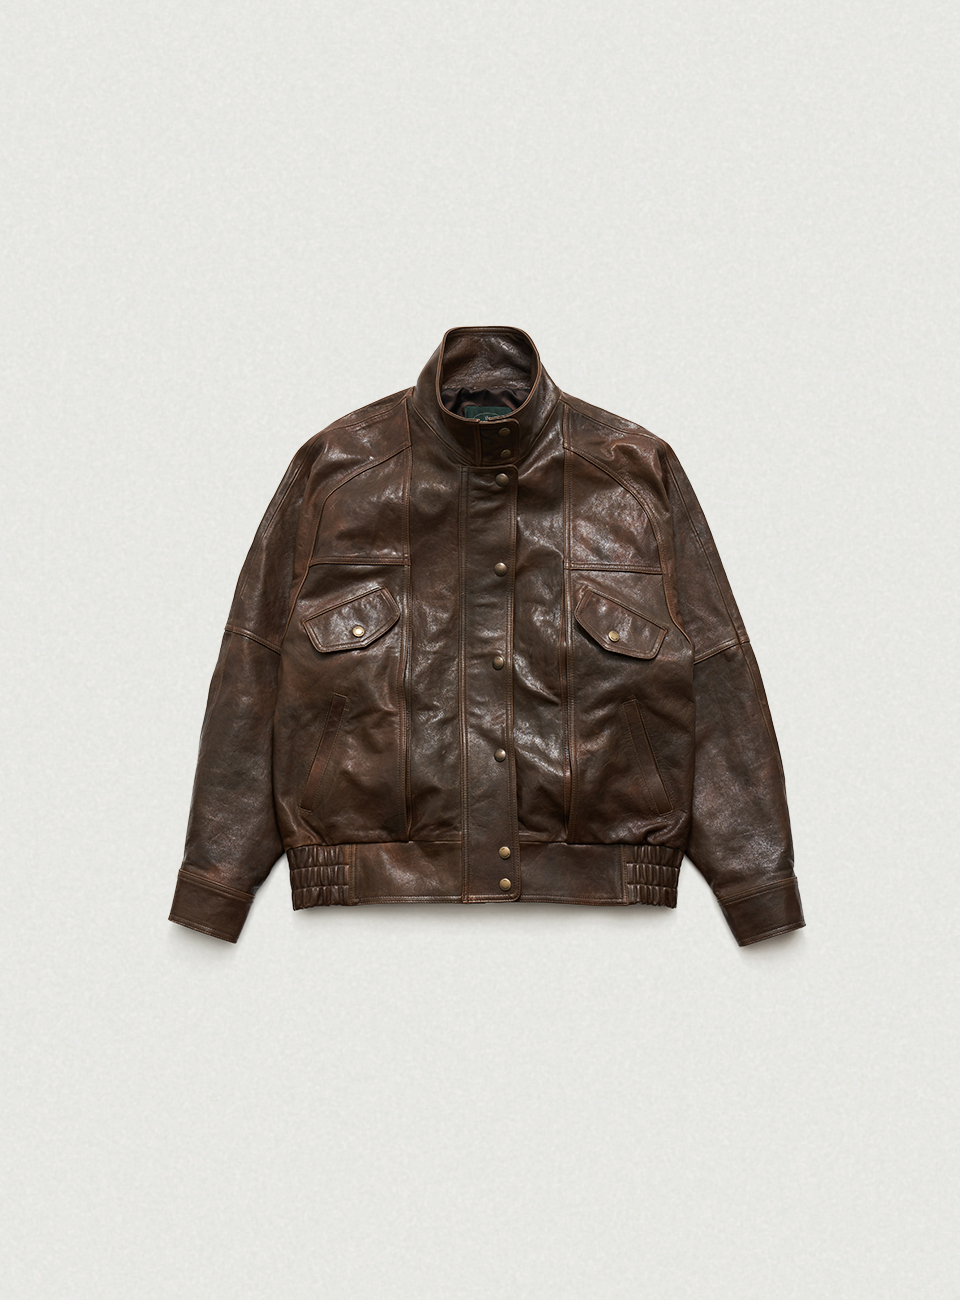 Stain Leather Motorcycle Jacket